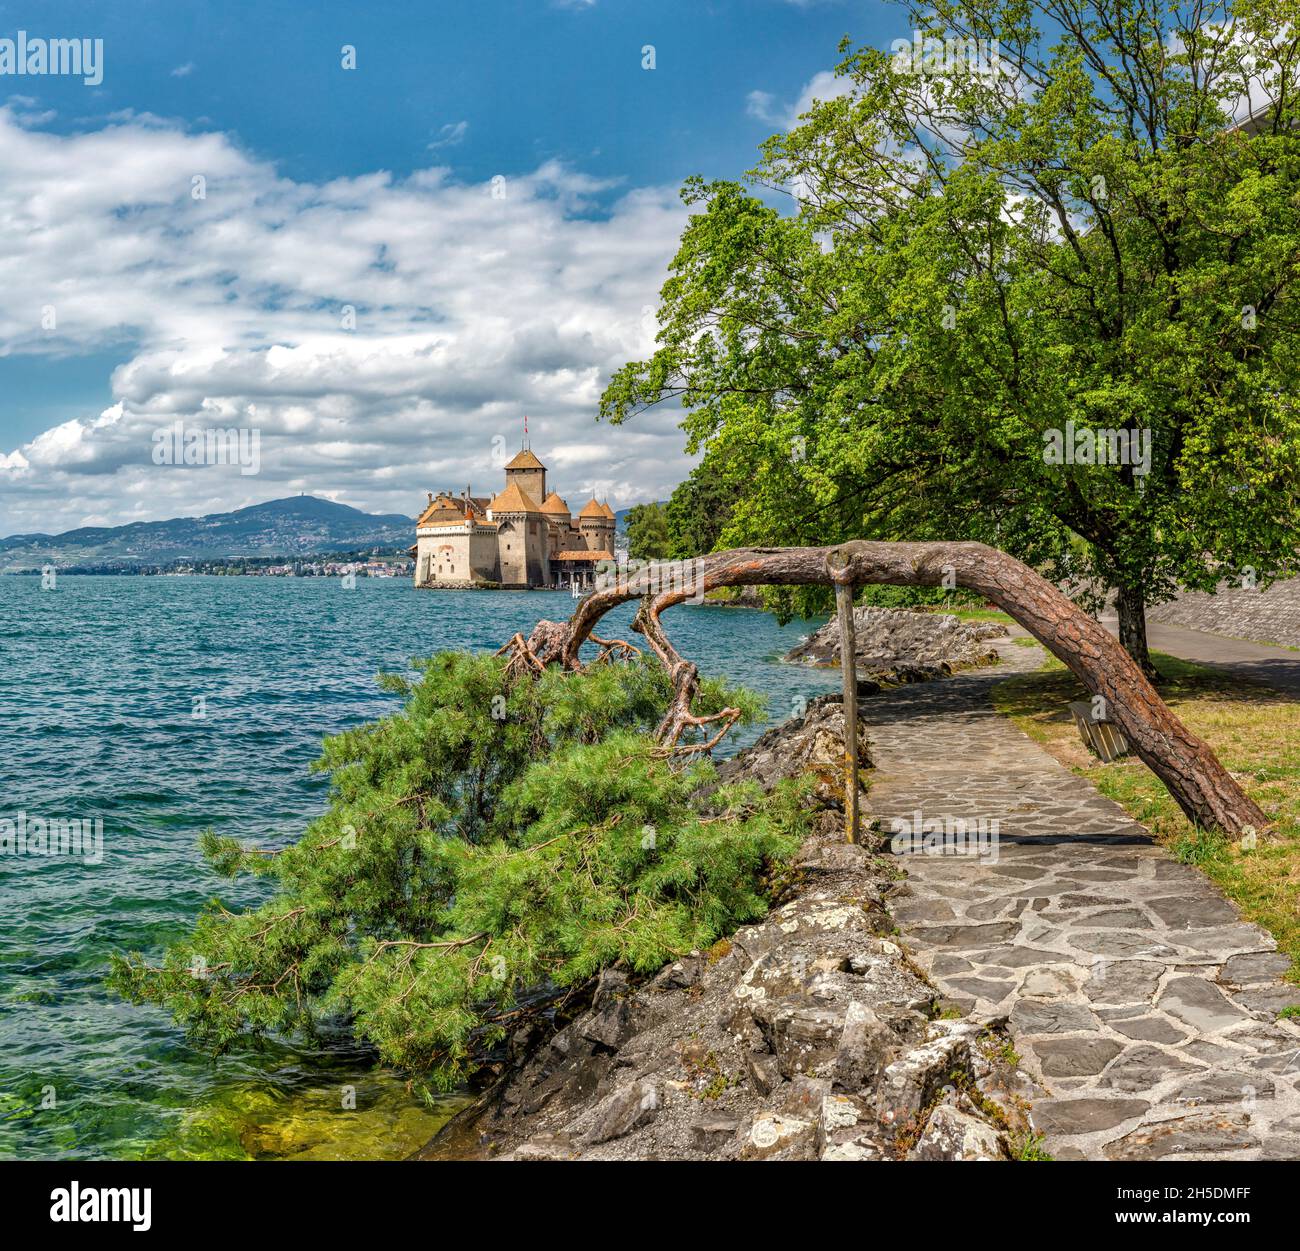 Chateau Chillon at the Lac Léman *** Local Caption ***  Veytaux, Switzerland, castle, water, trees, summer, mountains, lake, Stock Photo